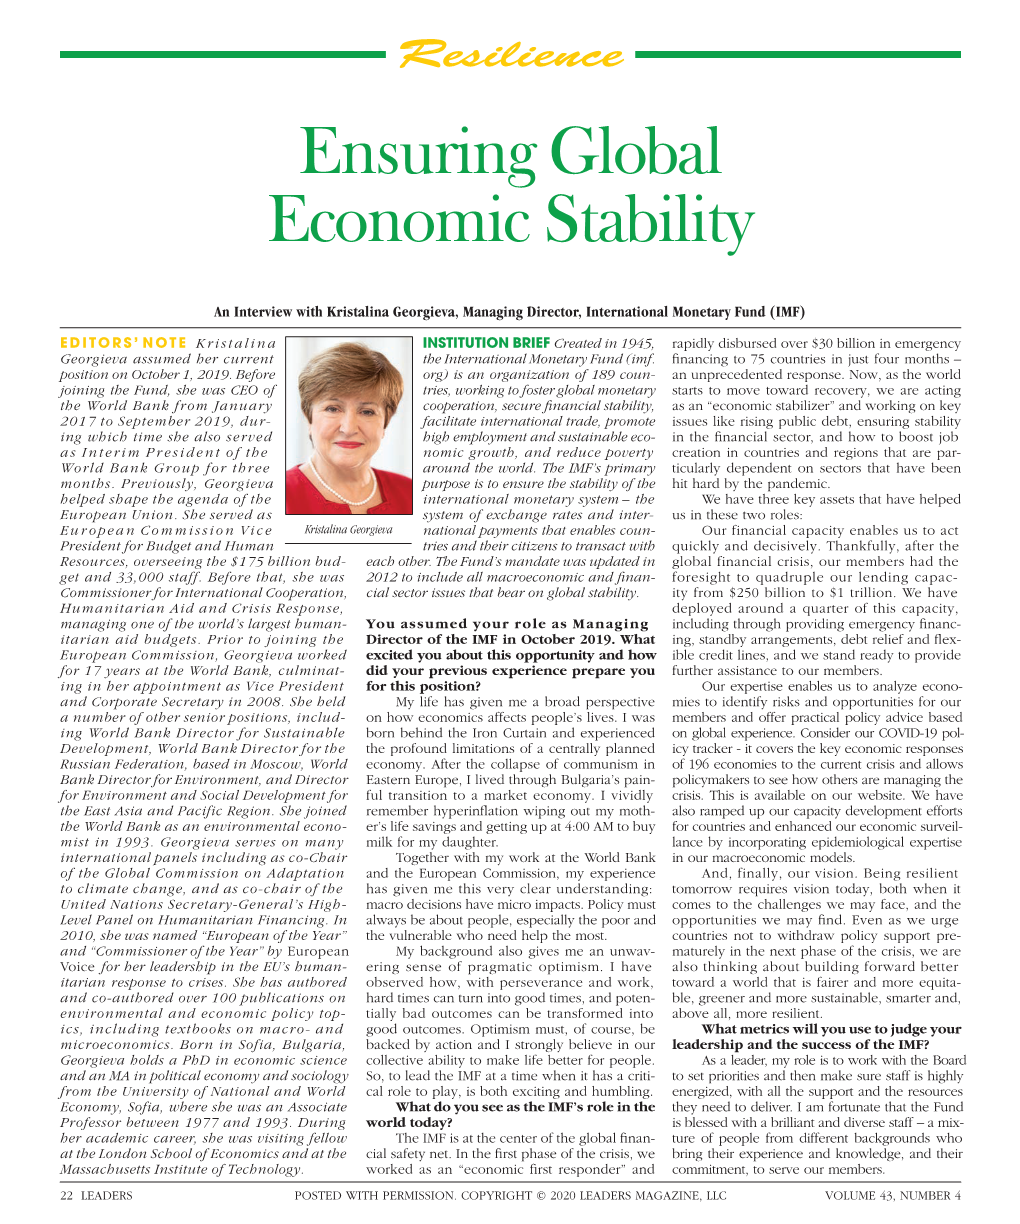 To Download a PDF of an Interview with Kristalina Georgieva